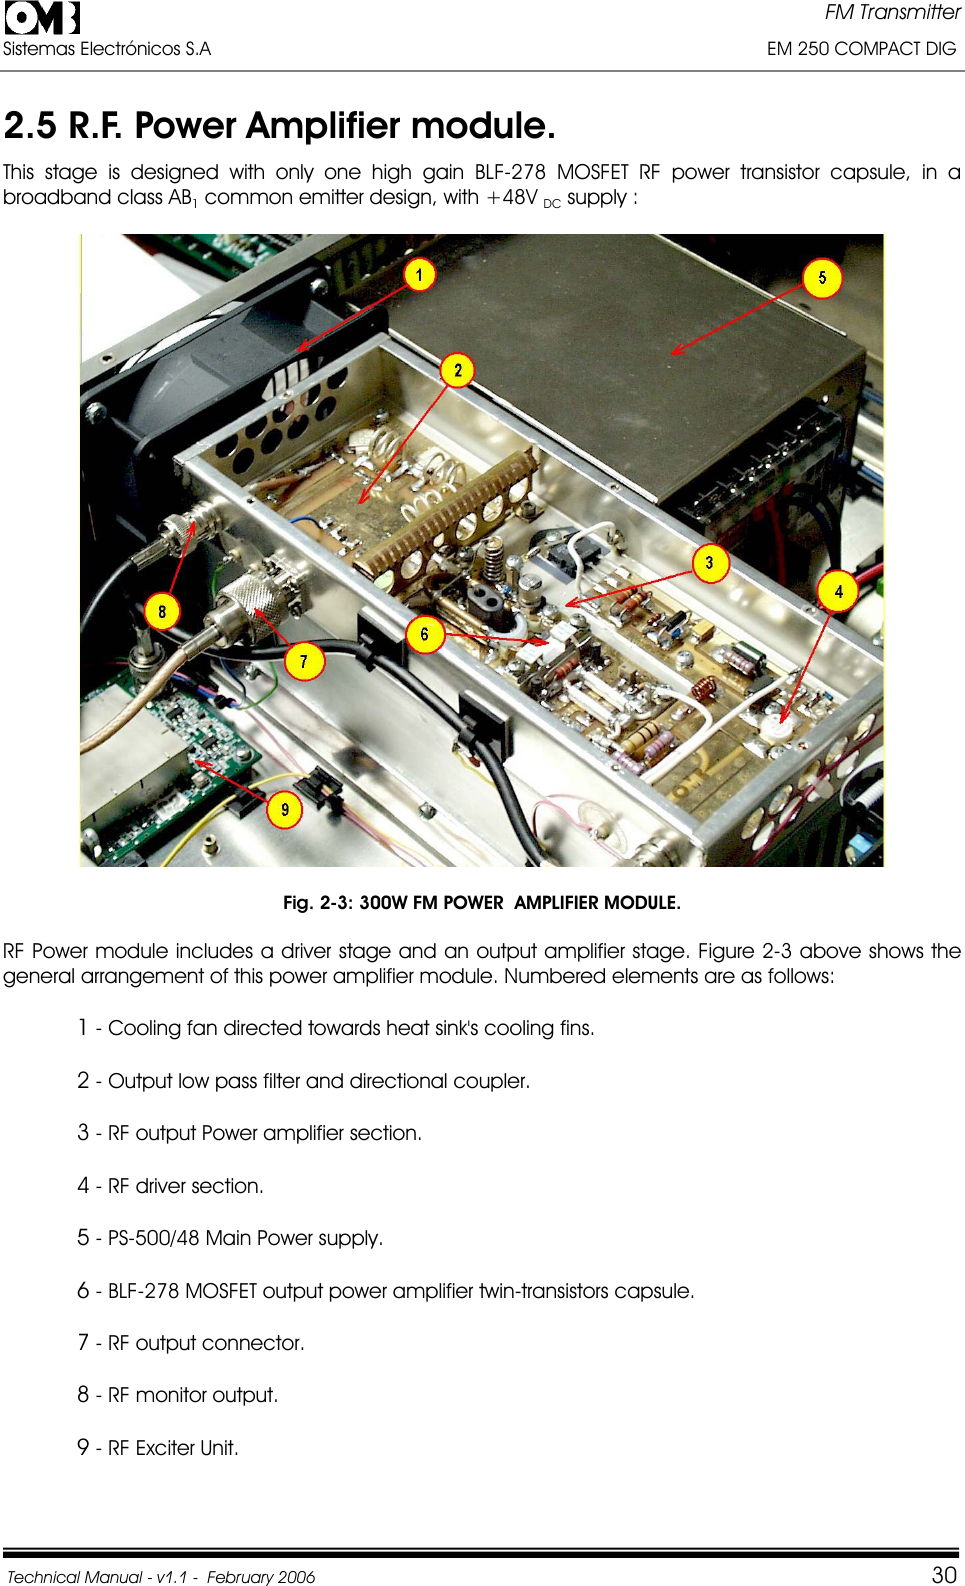 FM Transmitter Sistemas Electrónicos S.A                                                                                                         EM 250 COMPACT DIG  Technical Manual - v1.1 -  February 2006                                    302.5 R.F. Power Amplifier module.  This stage is designed with only one high gain BLF-278 MOSFET RF power transistor capsule, in a broadband class AB1 common emitter design, with +48V DC supply : Fig. 2-3: 300W FM POWER  AMPLIFIER MODULE. RF Power module includes a driver stage and an output amplifier stage. Figure 2-3 above shows the general arrangement of this power amplifier module. Numbered elements are as follows: 1 - Cooling fan directed towards heat sink&apos;s cooling fins. 2 - Output low pass filter and directional coupler. 3 - RF output Power amplifier section. 4 - RF driver section. 5 - PS-500/48 Main Power supply. 6 - BLF-278 MOSFET output power amplifier twin-transistors capsule. 7 - RF output connector. 8 - RF monitor output. 9 - RF Exciter Unit. 